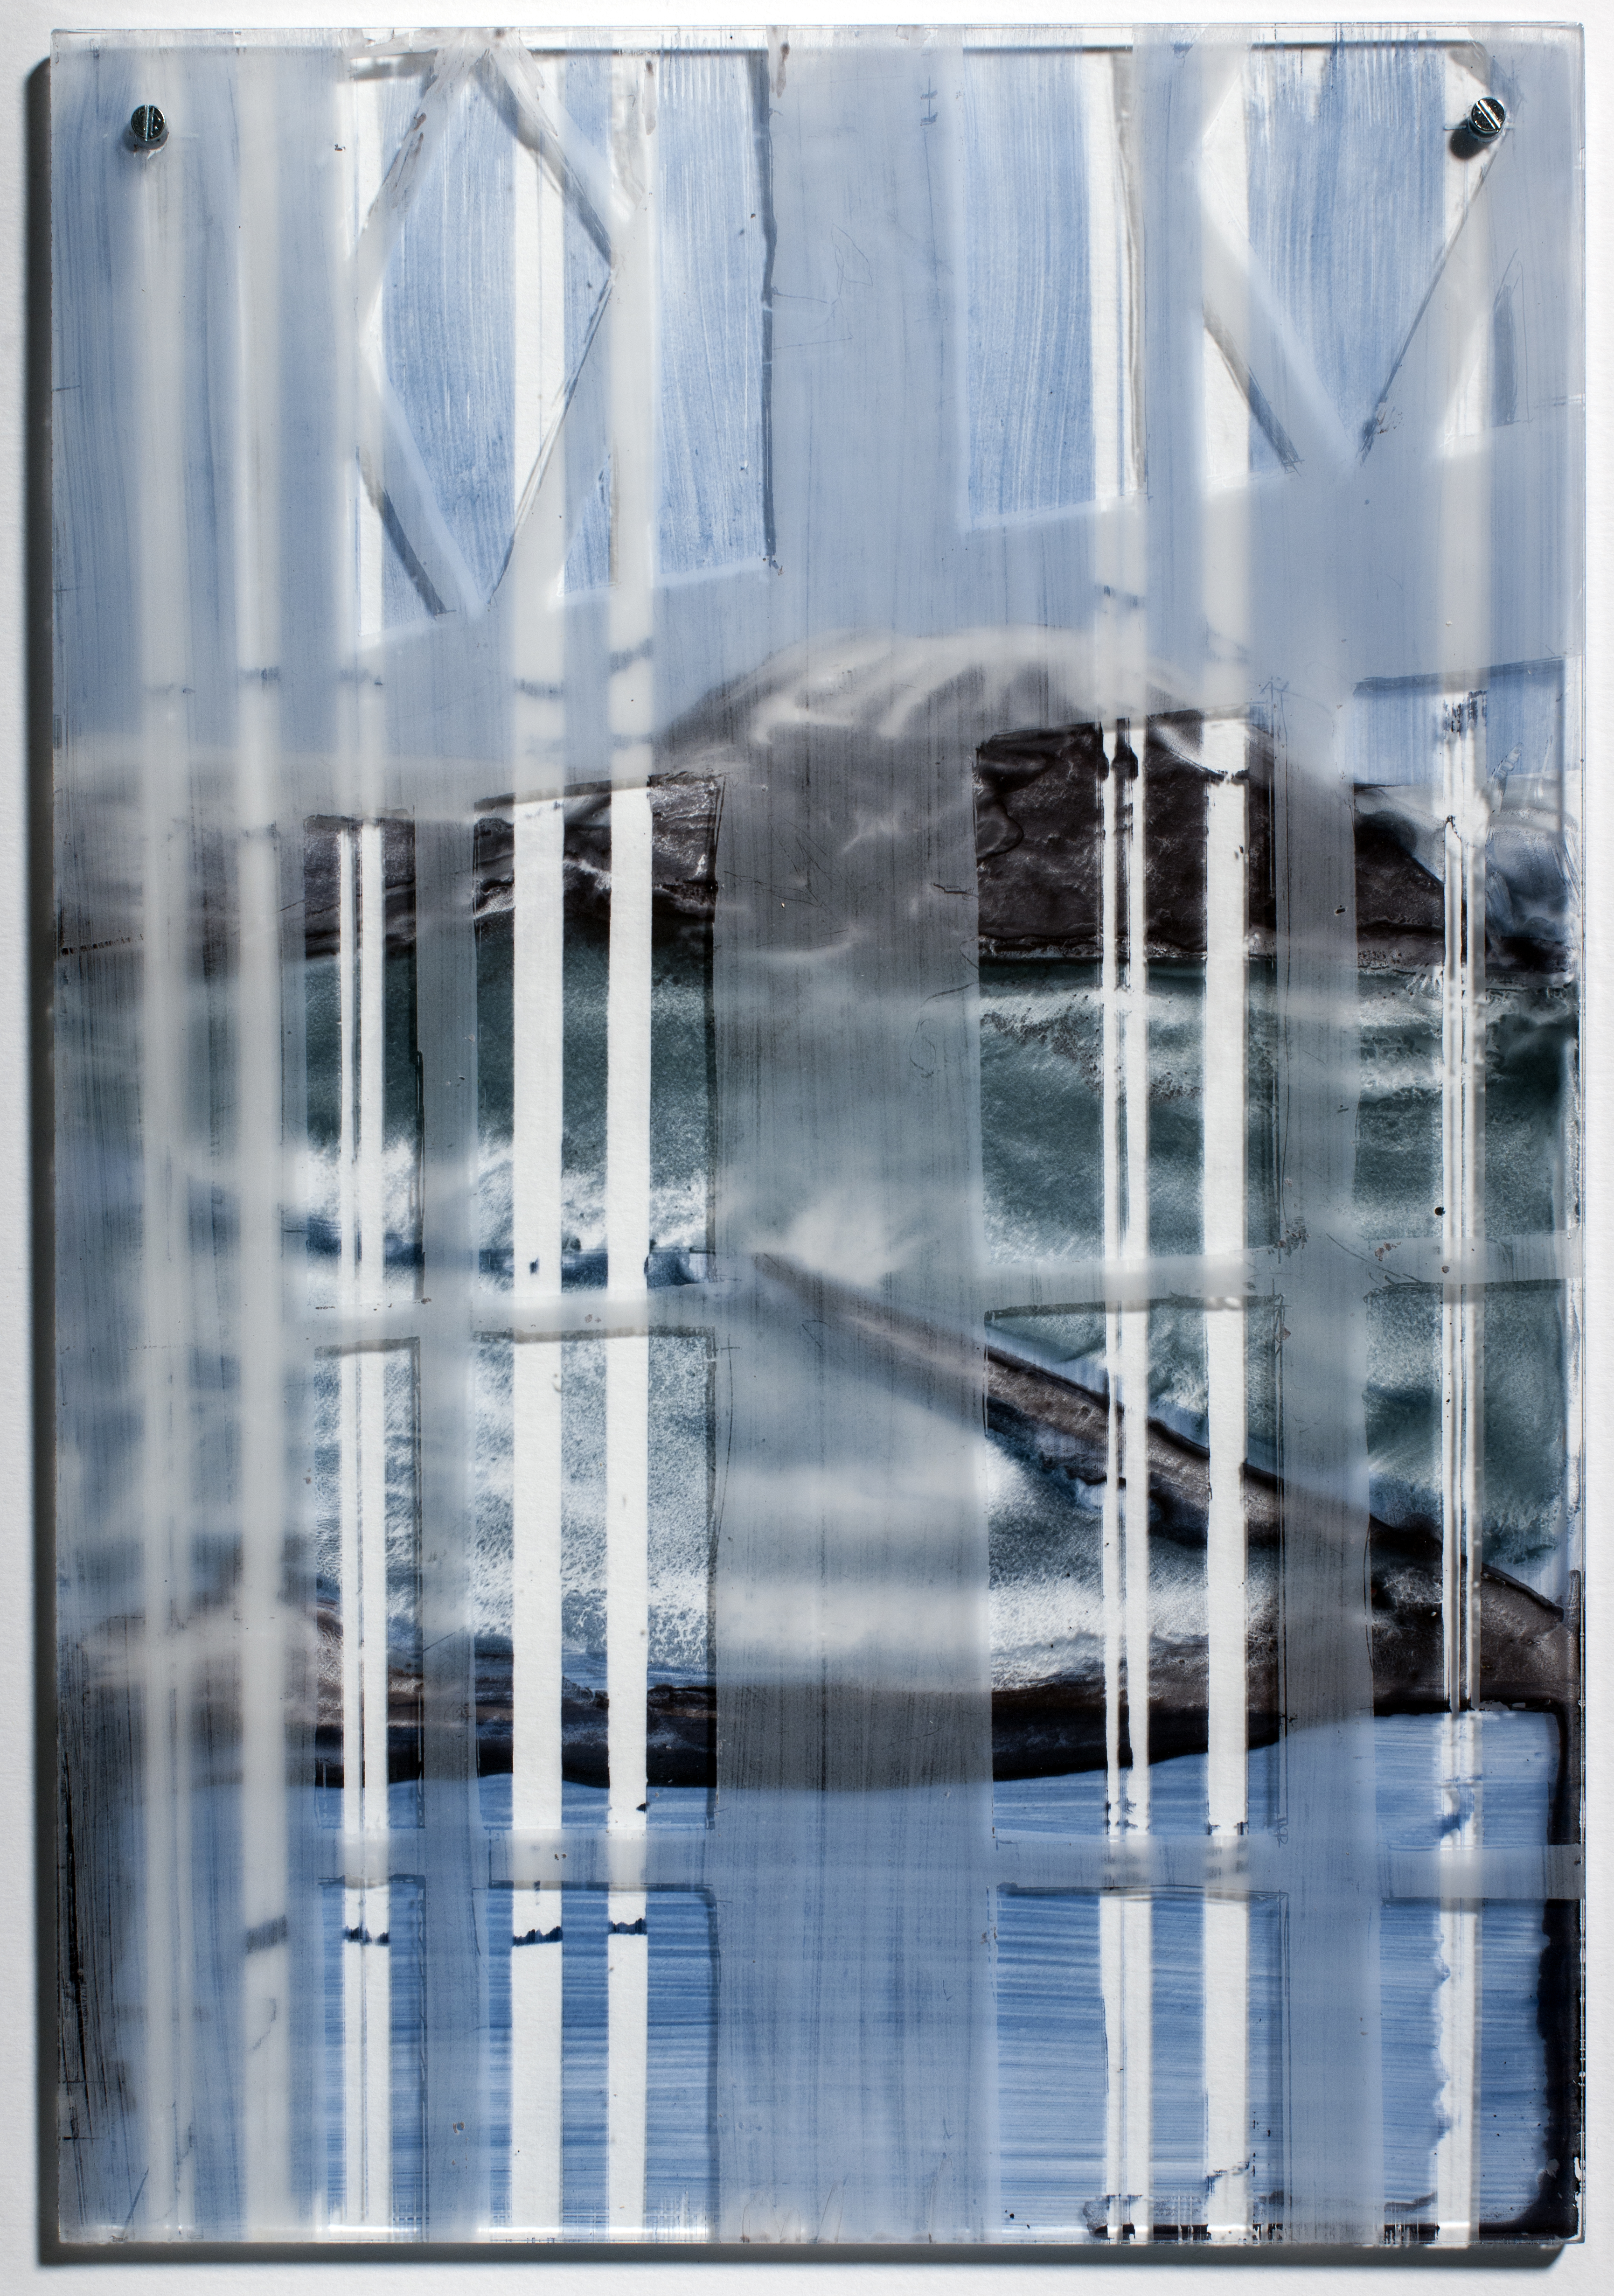 Pyramiden in A Villa  - 2014  emaille burnt on glass  34 x 23.5 cm